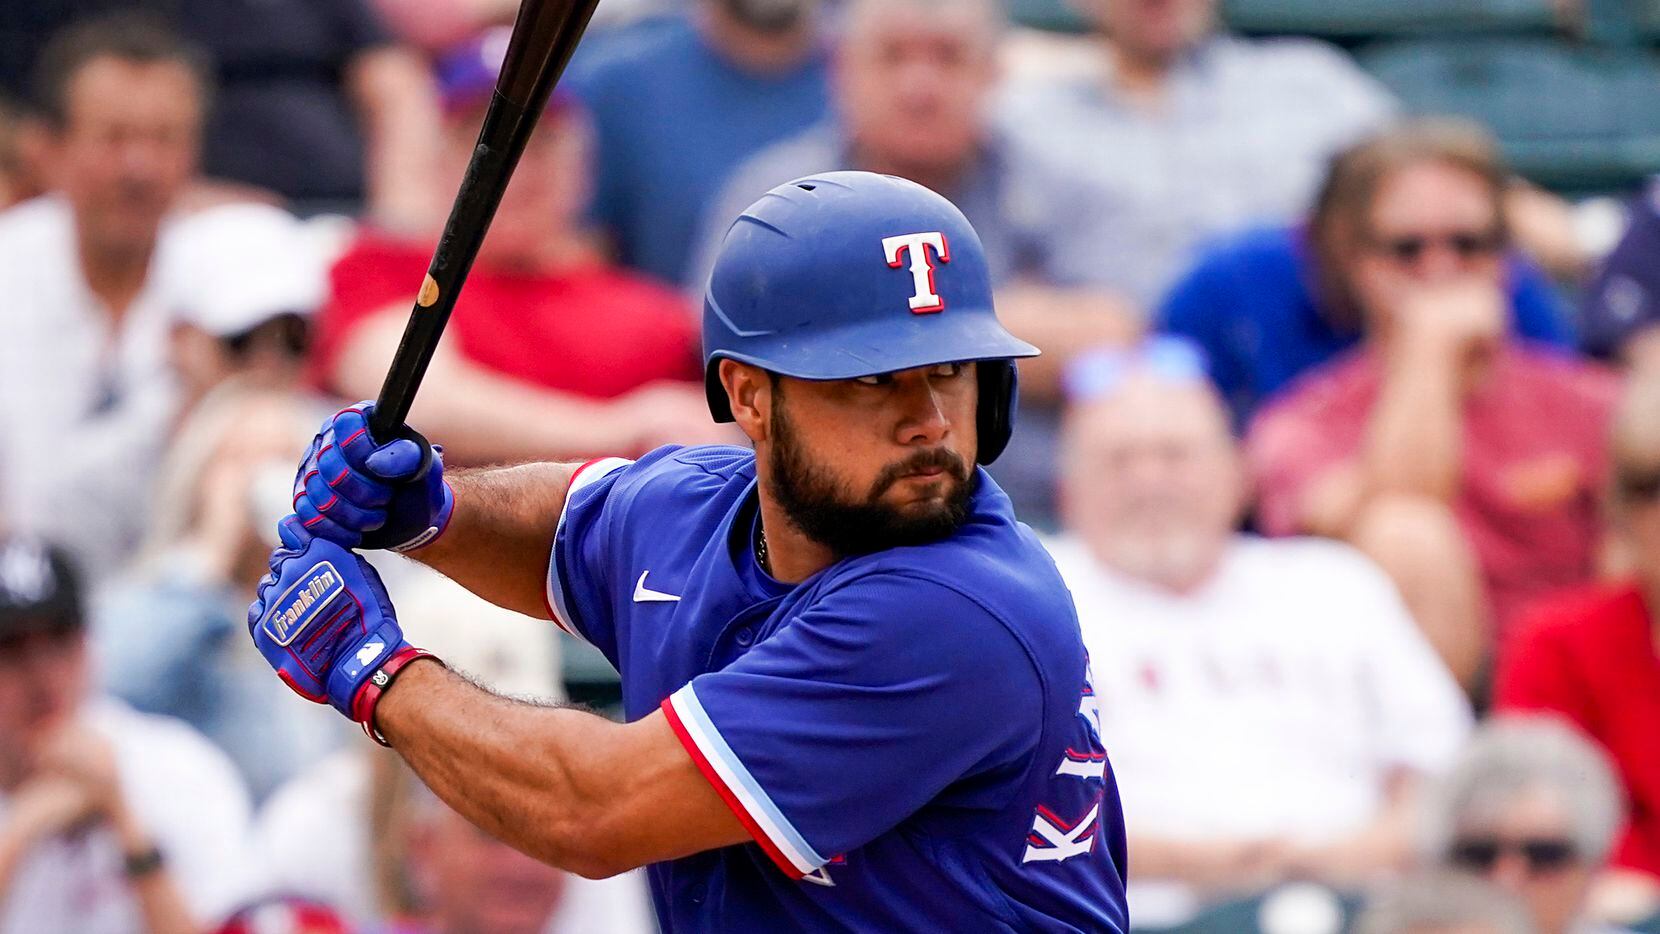 Texas Rangers infielder Isiah Kiner-Falefa bats during a spring training game against the...